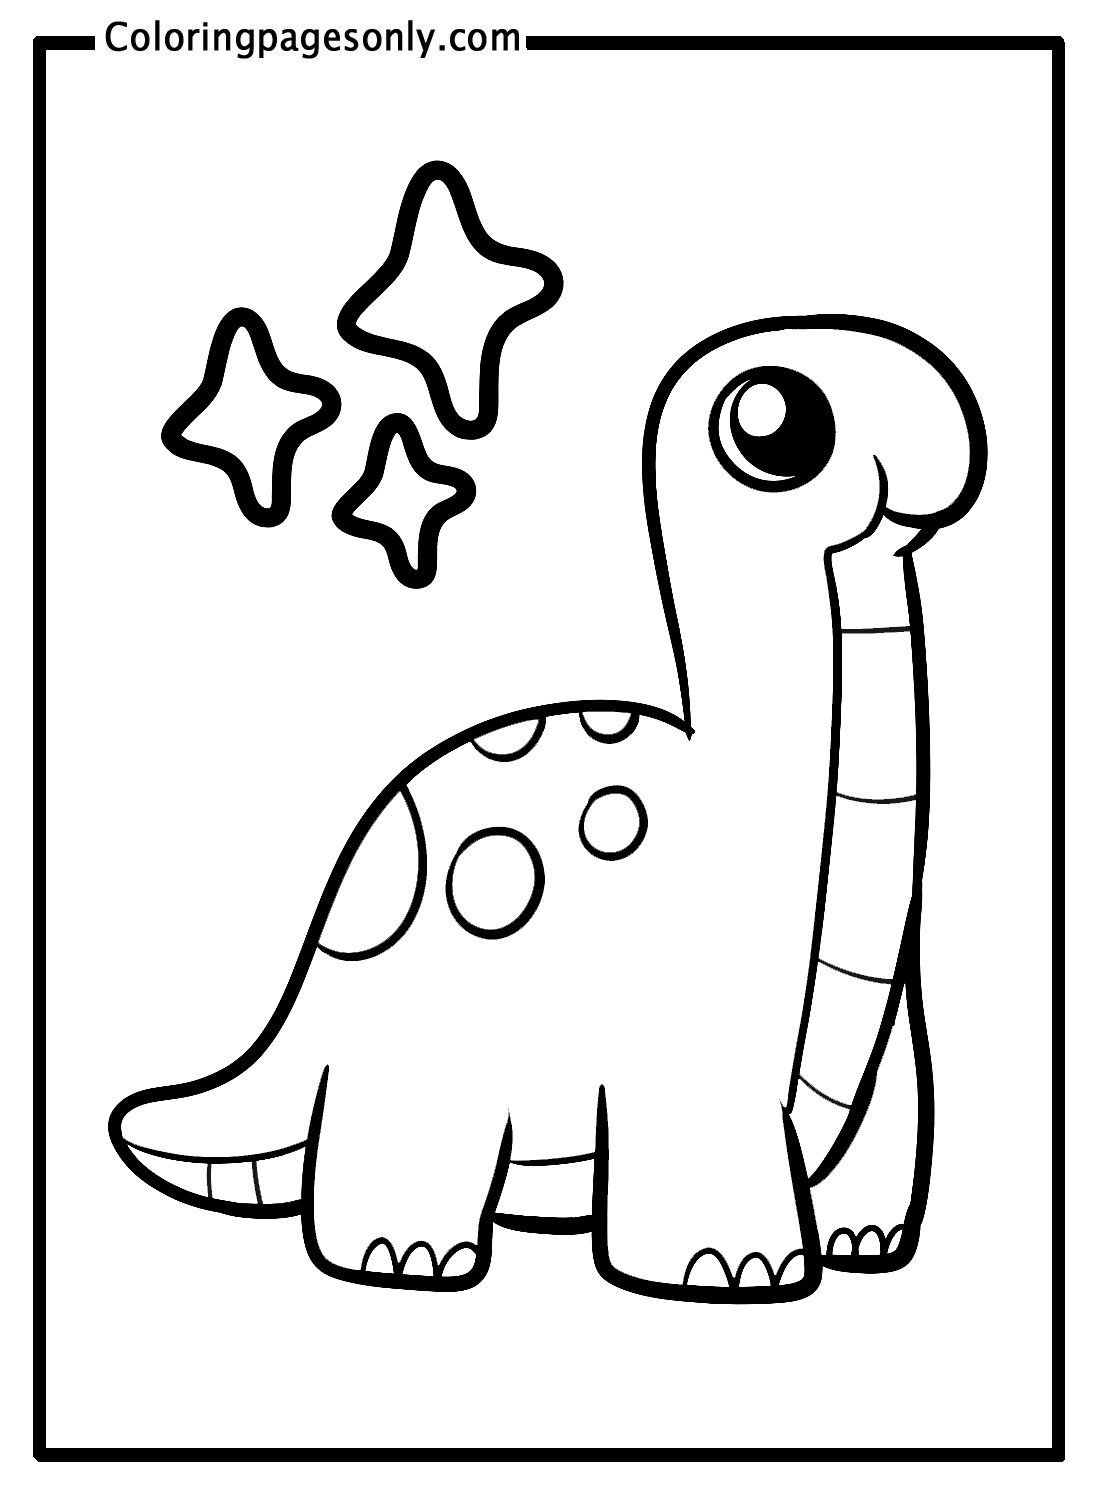 easy kids cartoon coloring pages